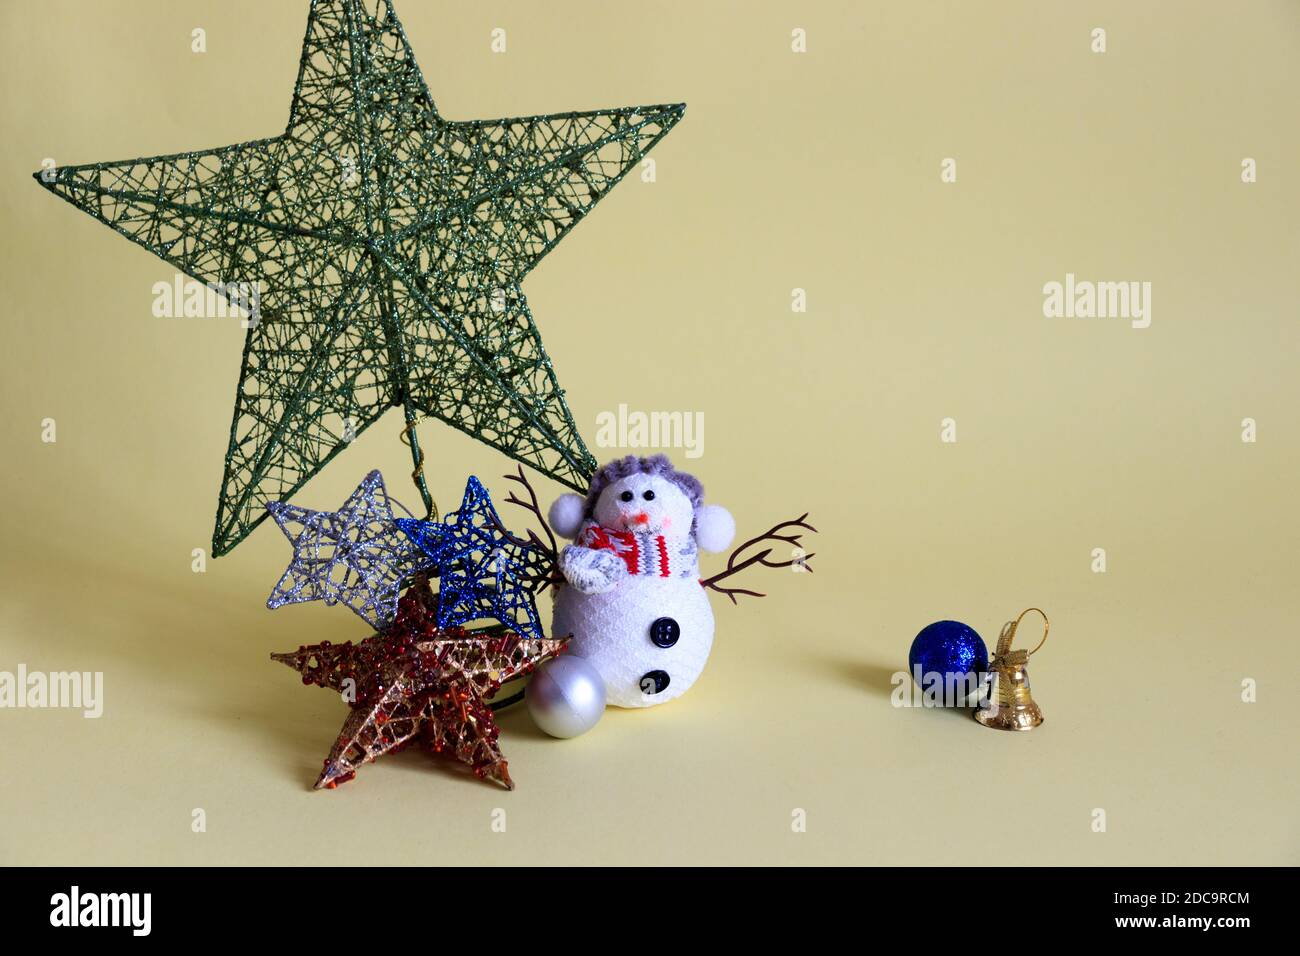 Christmas ornaments and decorations, winter new years eve concept Stock Photo